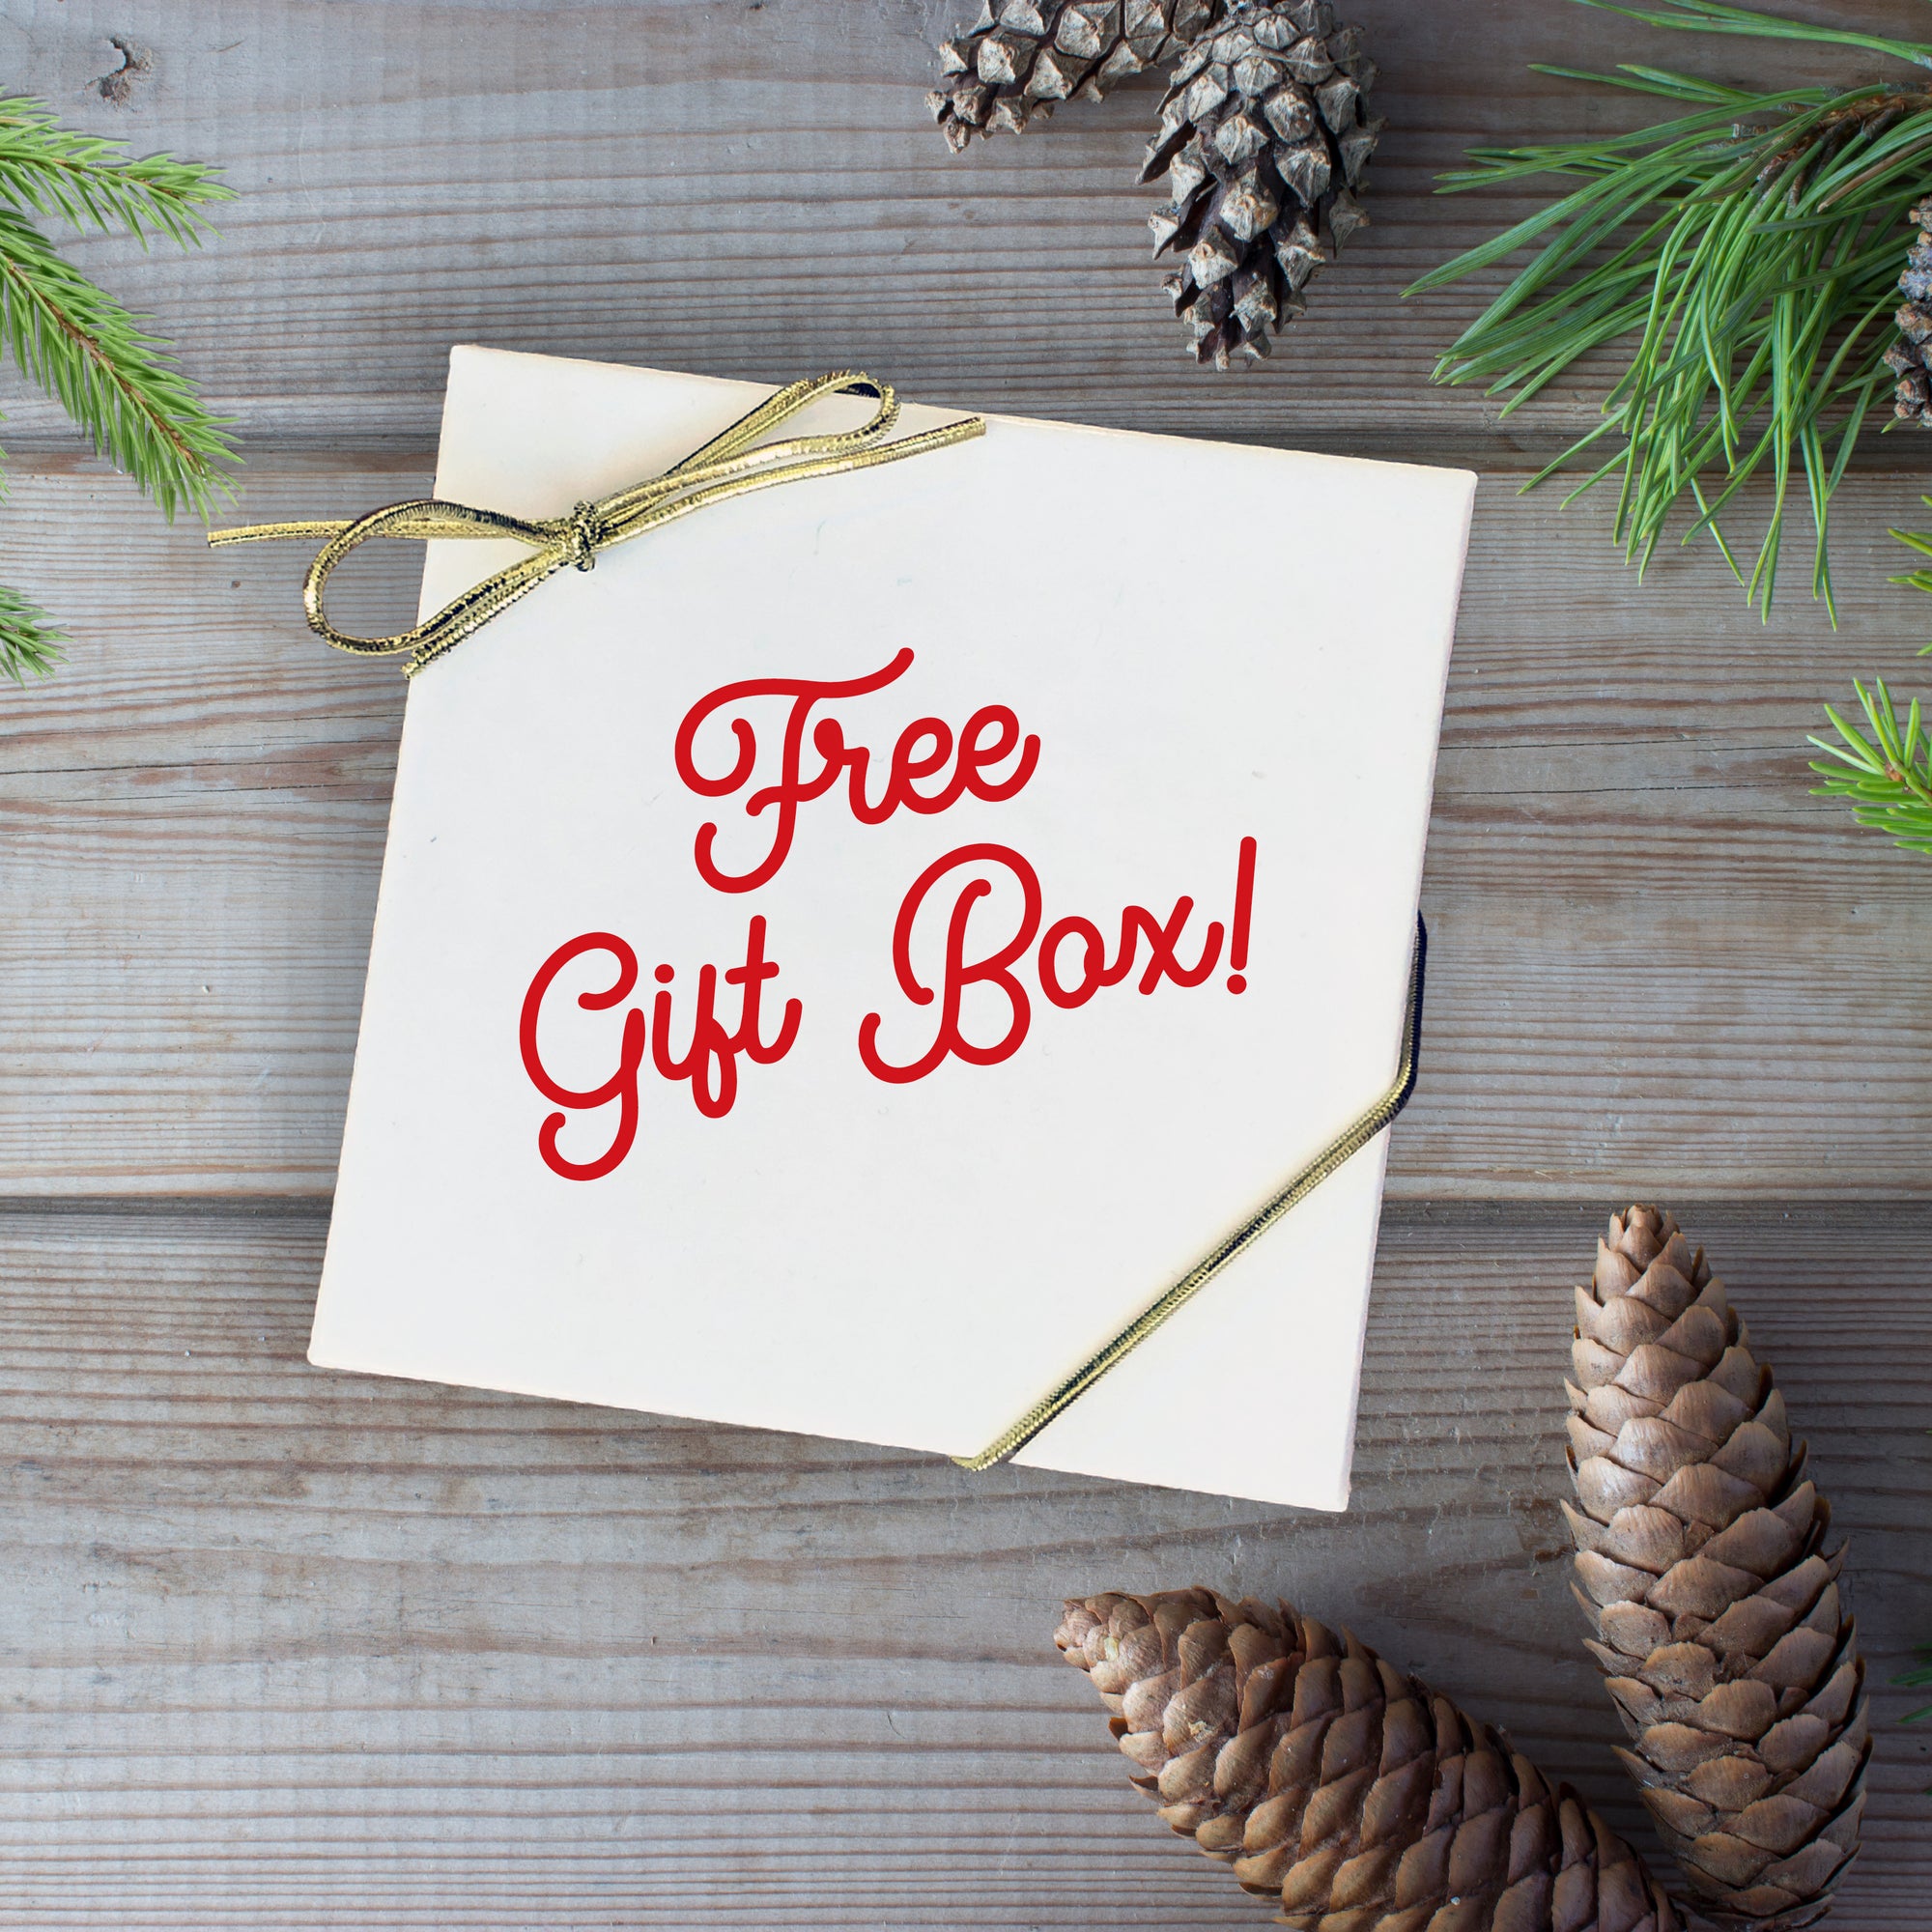 free gift box included with purchase